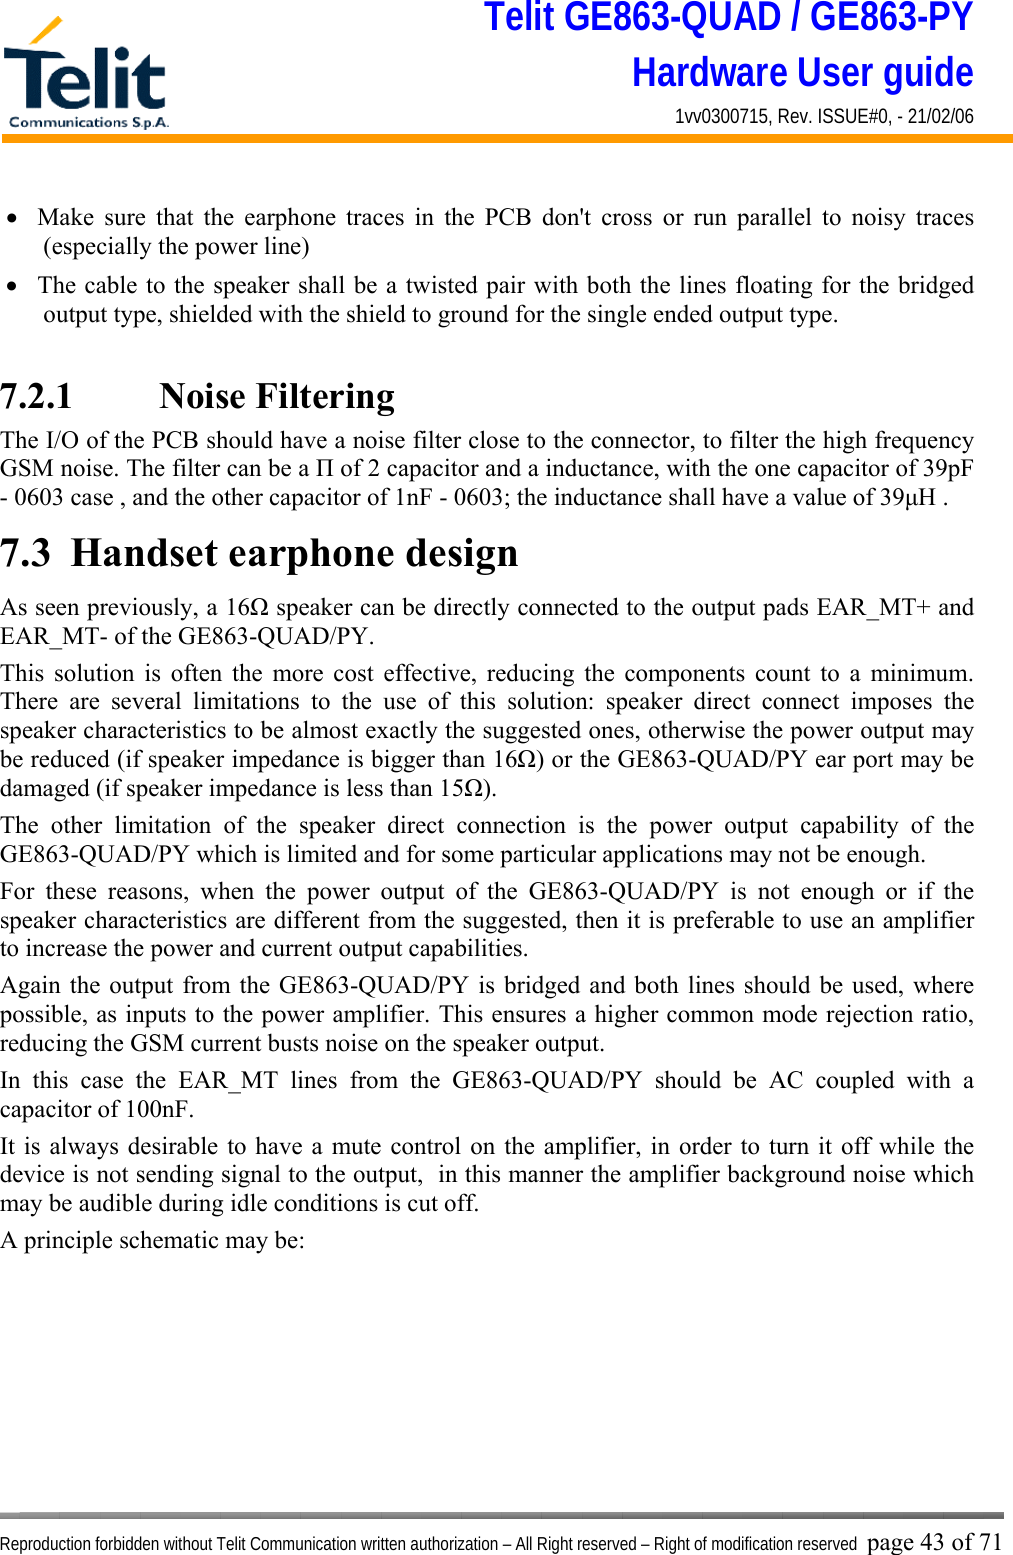 Telit GE863-QUAD / GE863-PY Hardware User guide 1vv0300715, Rev. ISSUE#0, - 21/02/06    Reproduction forbidden without Telit Communication written authorization – All Right reserved – Right of modification reserved page 43 of 71 •  Make sure that the earphone traces in the PCB don&apos;t cross or run parallel to noisy traces (especially the power line)  •  The cable to the speaker shall be a twisted pair with both the lines floating for the bridged output type, shielded with the shield to ground for the single ended output type.  7.2.1    Noise Filtering The I/O of the PCB should have a noise filter close to the connector, to filter the high frequency GSM noise. The filter can be a Π of 2 capacitor and a inductance, with the one capacitor of 39pF - 0603 case , and the other capacitor of 1nF - 0603; the inductance shall have a value of 39μH . 7.3  Handset earphone design As seen previously, a 16Ω speaker can be directly connected to the output pads EAR_MT+ and EAR_MT- of the GE863-QUAD/PY. This solution is often the more cost effective, reducing the components count to a minimum. There are several limitations to the use of this solution: speaker direct connect imposes the speaker characteristics to be almost exactly the suggested ones, otherwise the power output may be reduced (if speaker impedance is bigger than 16Ω) or the GE863-QUAD/PY ear port may be damaged (if speaker impedance is less than 15Ω). The other limitation of the speaker direct connection is the power output capability of the GE863-QUAD/PY which is limited and for some particular applications may not be enough. For these reasons, when the power output of the GE863-QUAD/PY is not enough or if the speaker characteristics are different from the suggested, then it is preferable to use an amplifier to increase the power and current output capabilities.  Again the output from the GE863-QUAD/PY is bridged and both lines should be used, where possible, as inputs to the power amplifier. This ensures a higher common mode rejection ratio, reducing the GSM current busts noise on the speaker output. In this case the EAR_MT lines from the GE863-QUAD/PY should be AC coupled with a capacitor of 100nF. It is always desirable to have a mute control on the amplifier, in order to turn it off while the device is not sending signal to the output,  in this manner the amplifier background noise which may be audible during idle conditions is cut off. A principle schematic may be: 